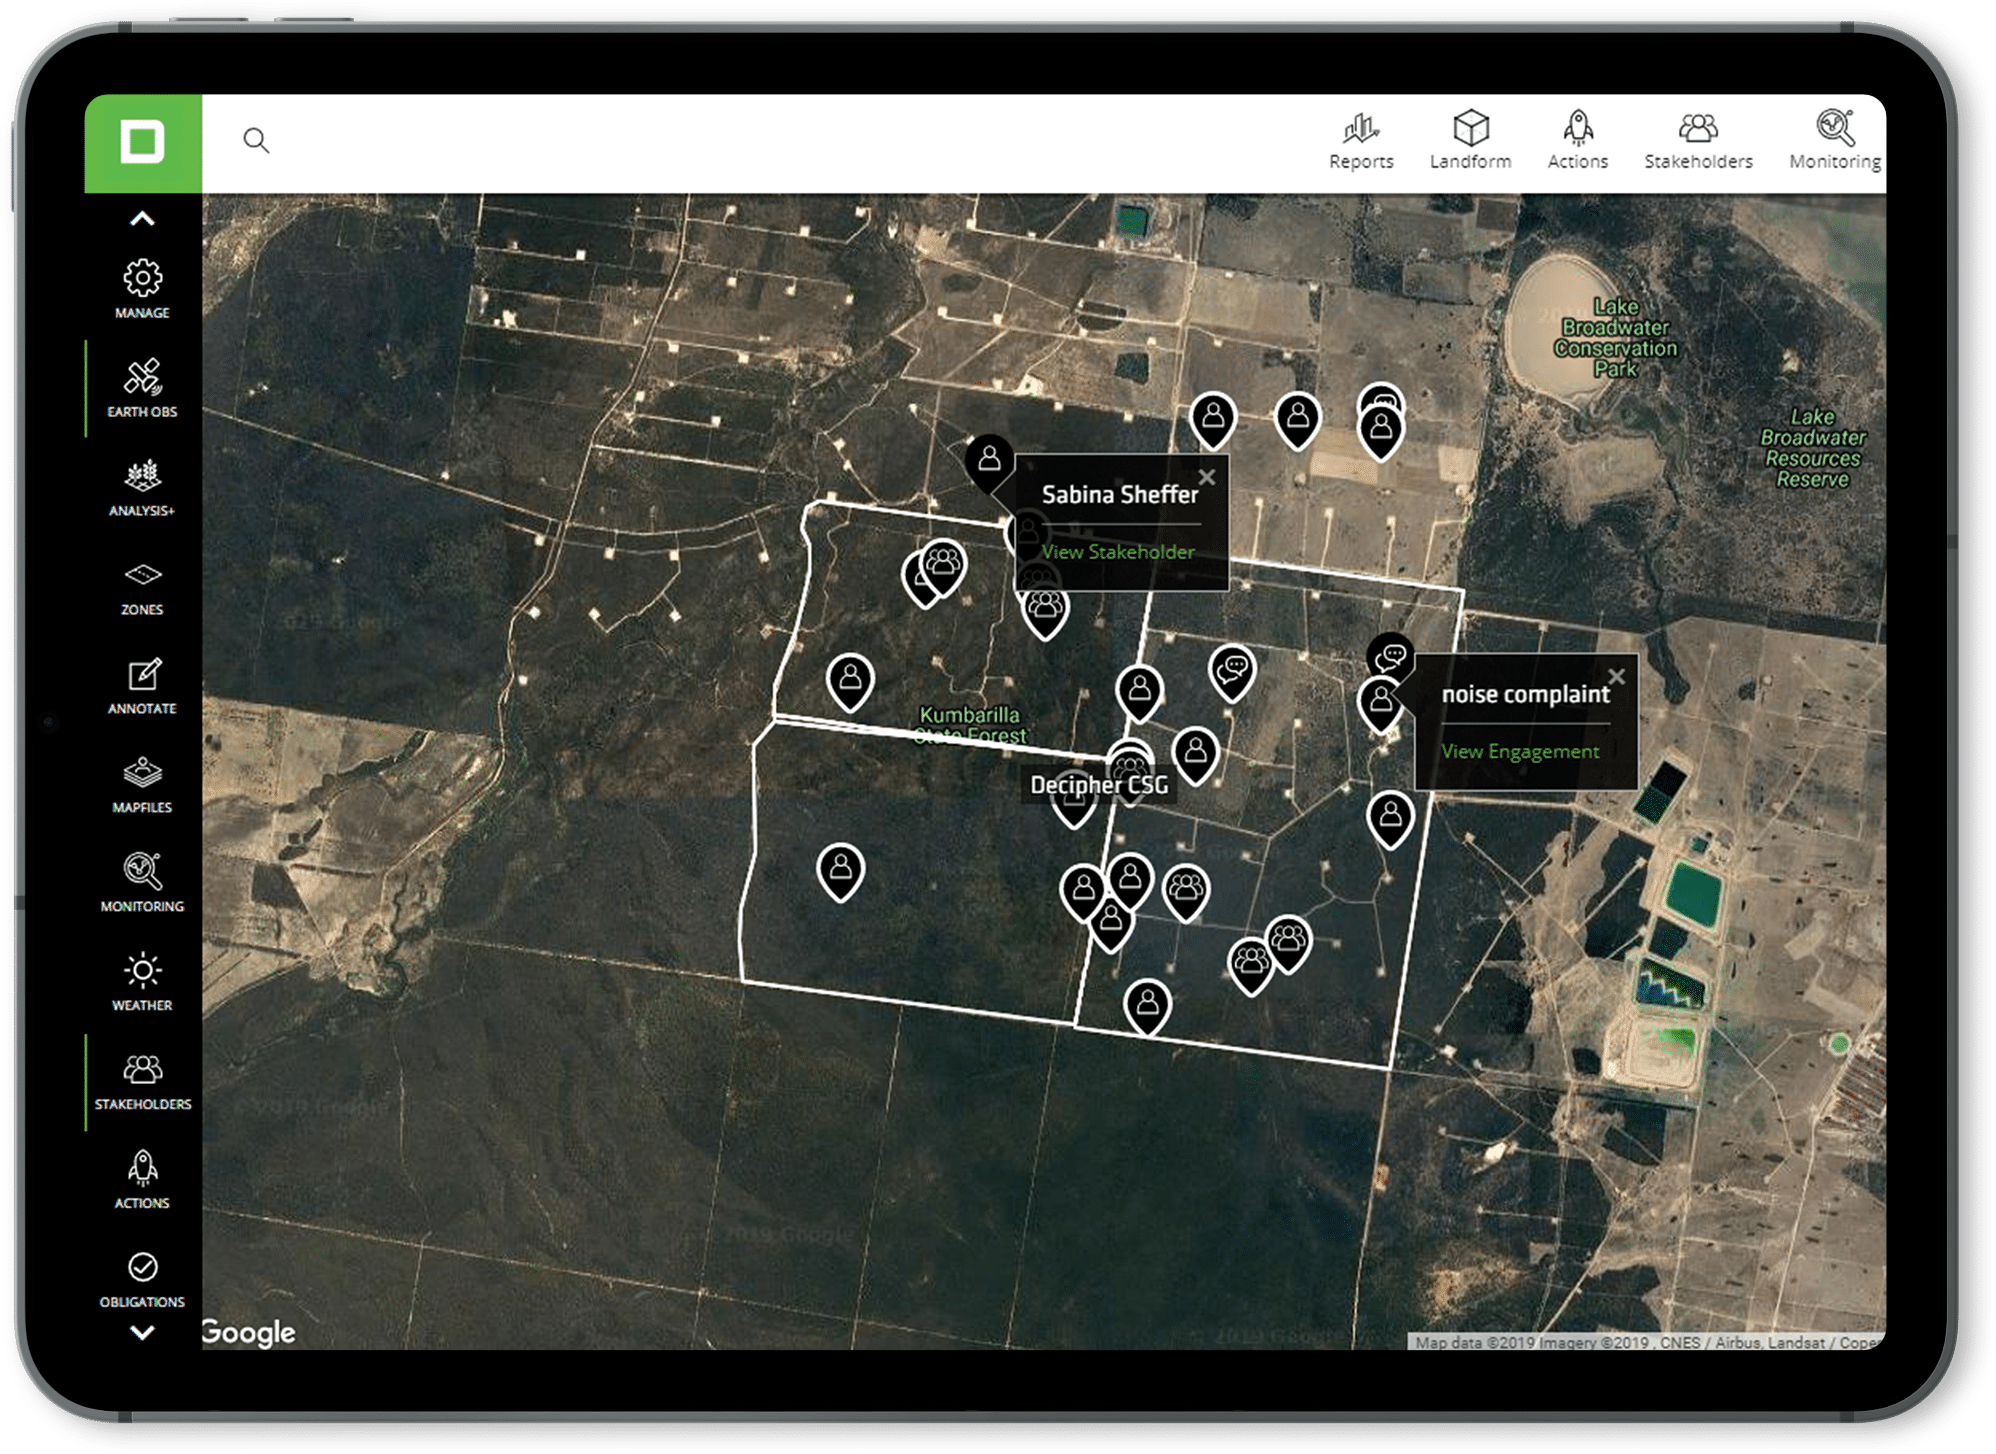 Stakeholders - Decipher Tailings Monitoring - Wesfarmers